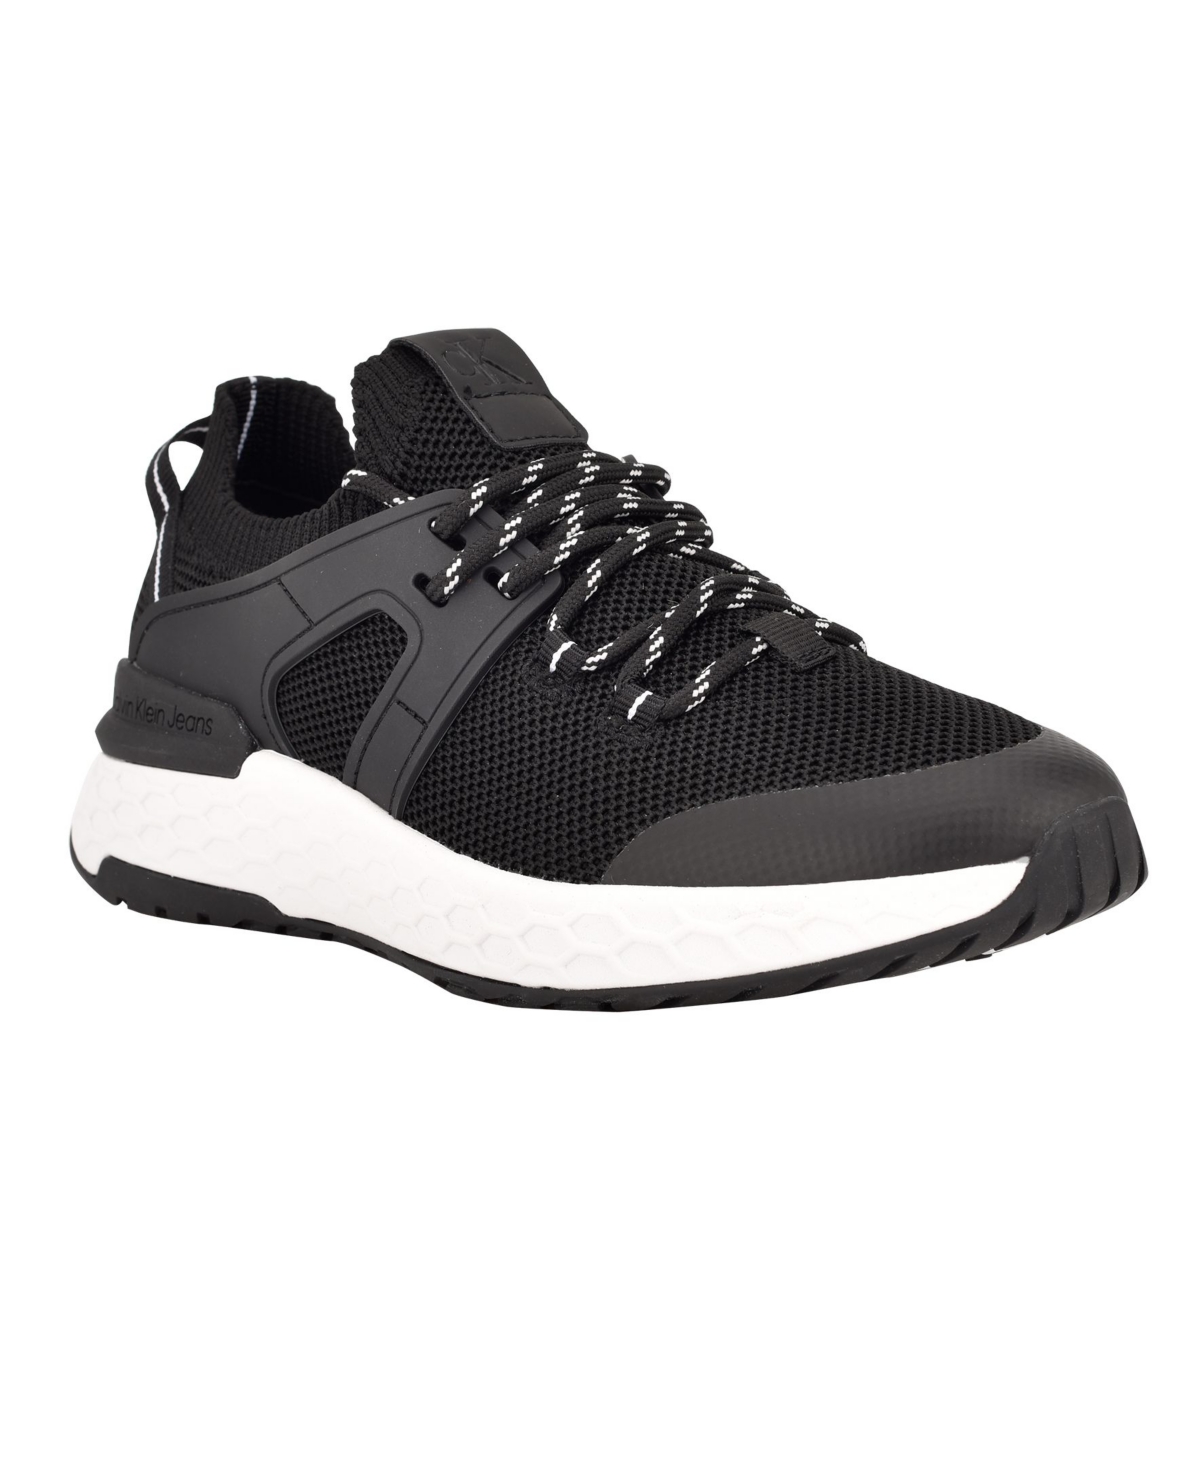 UPC 195972002302 product image for Calvin Klein Women's Aleah Lace-Up Sneakers Women's Shoes | upcitemdb.com